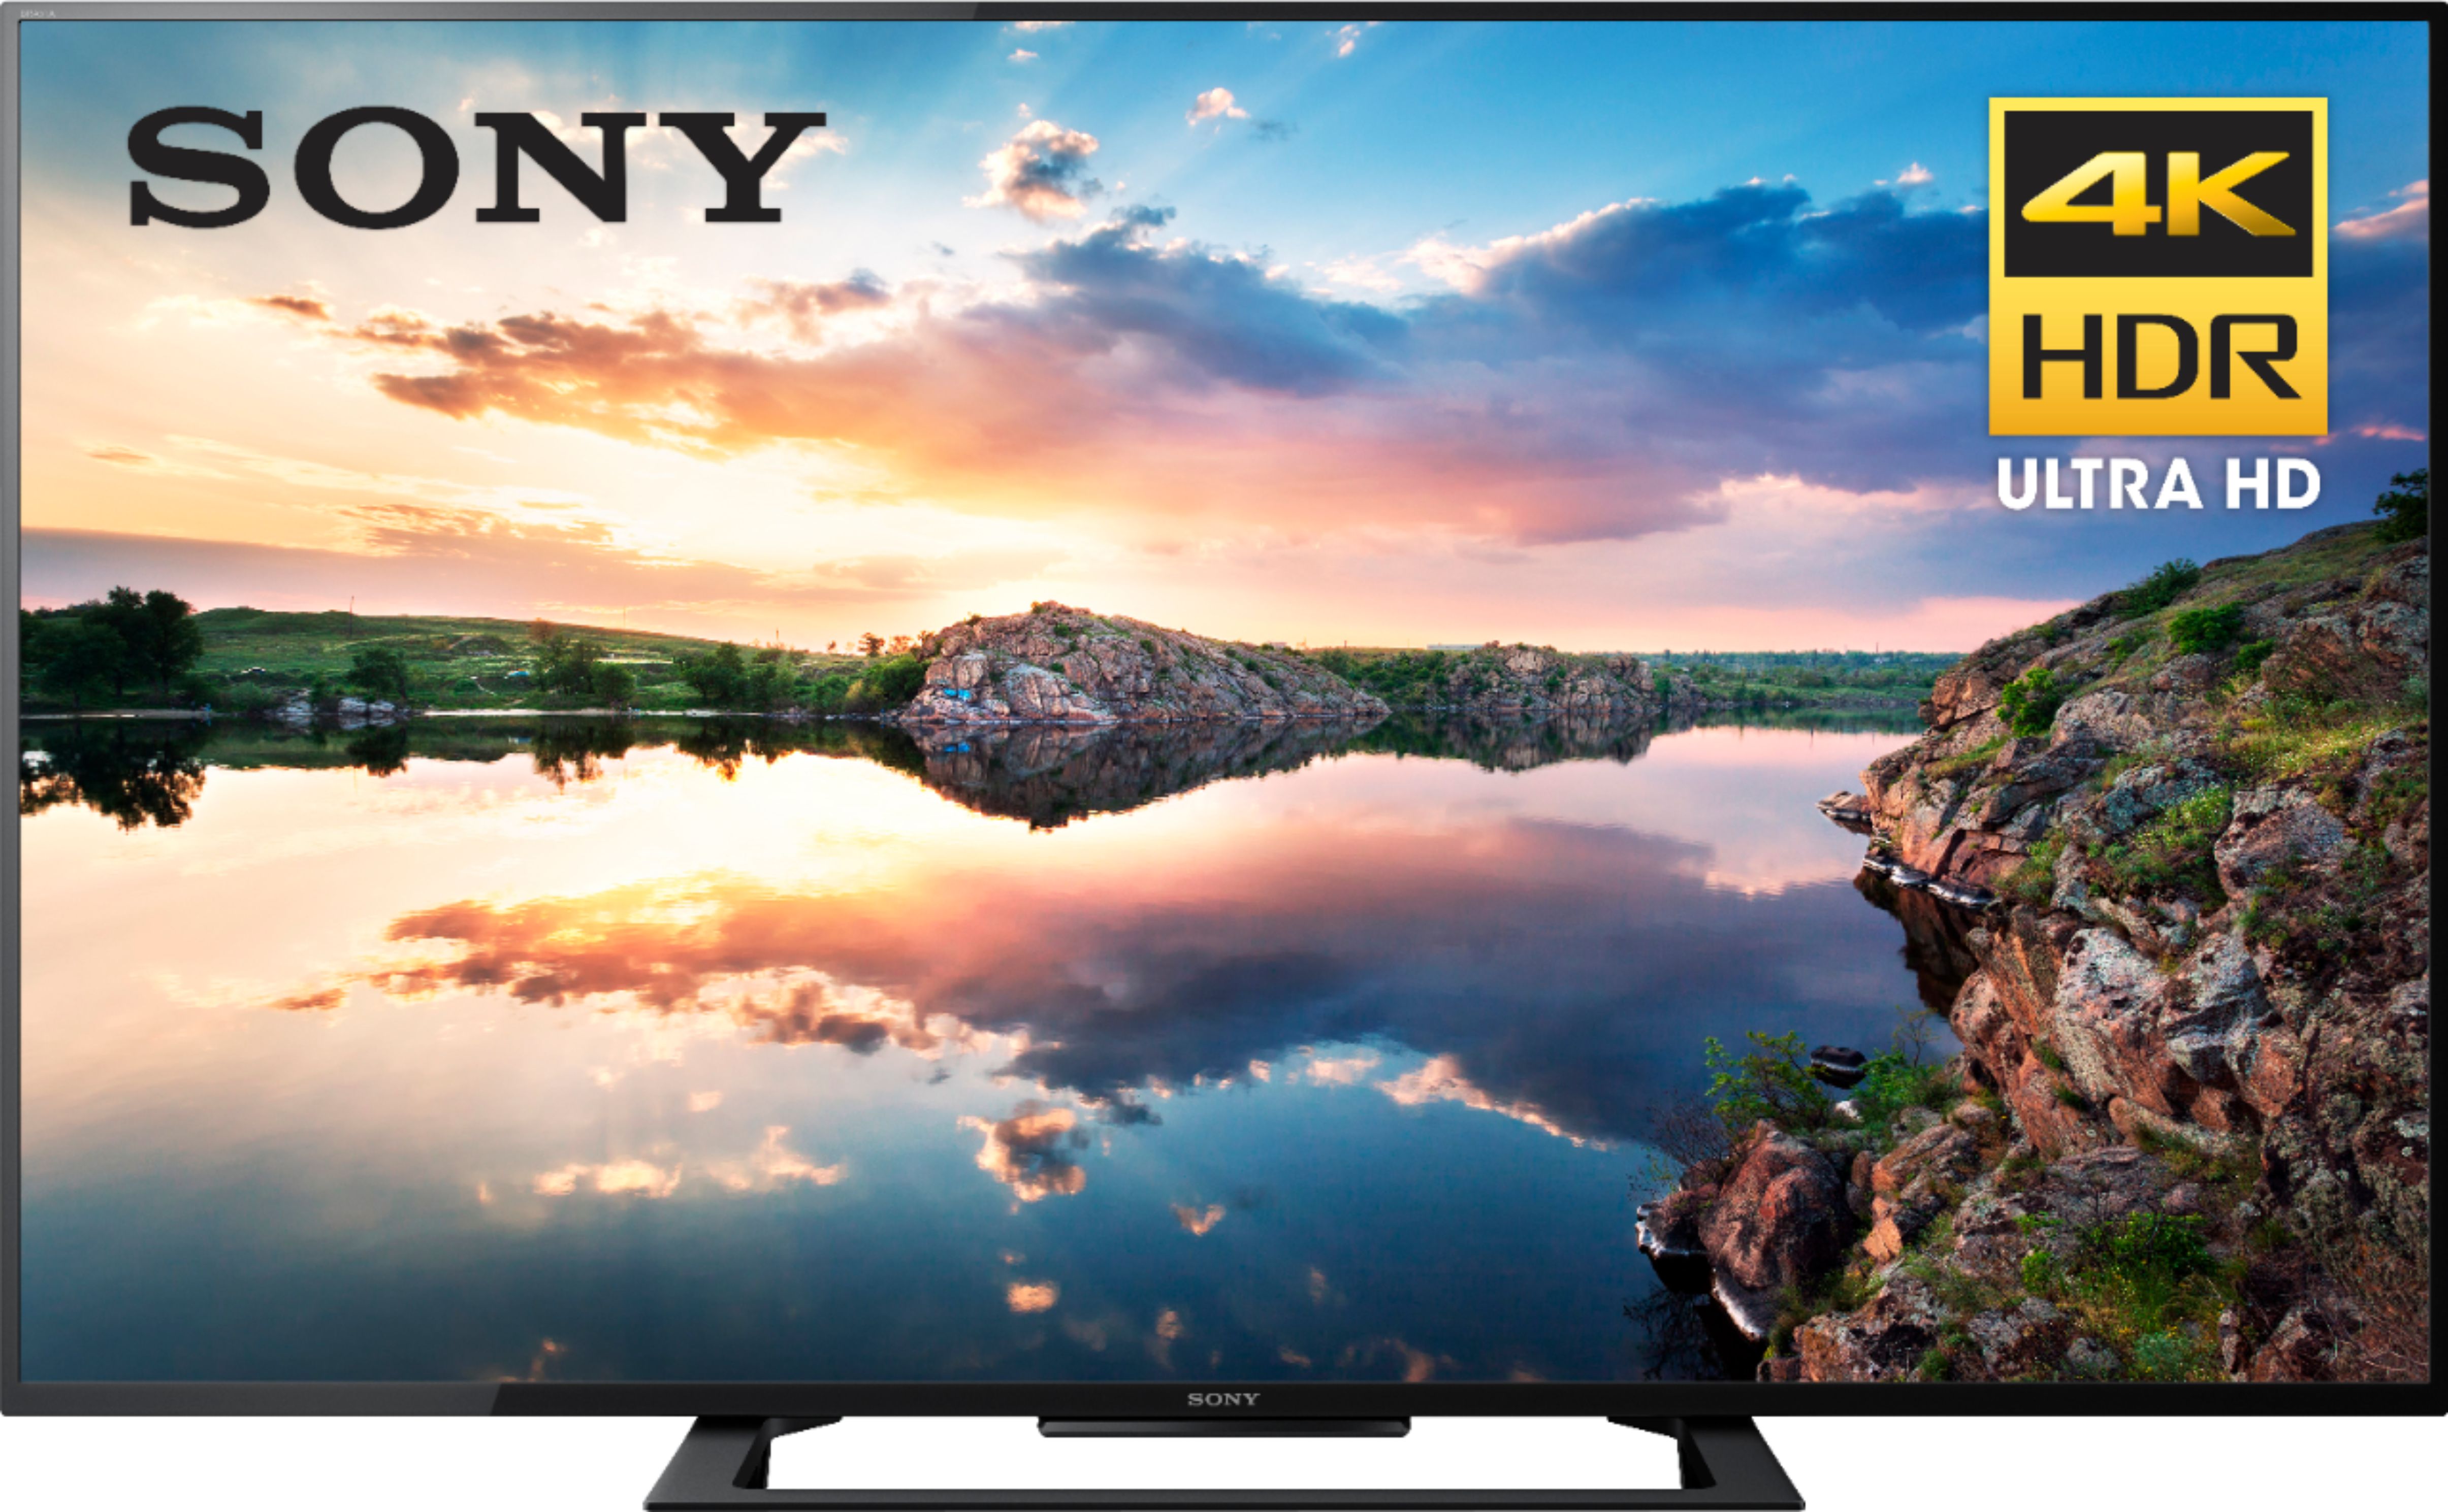 Sony 70 Class Led X690e Series 2160p Smart 4k Uhd Tv With Hdr Kd70x690e Best Buy